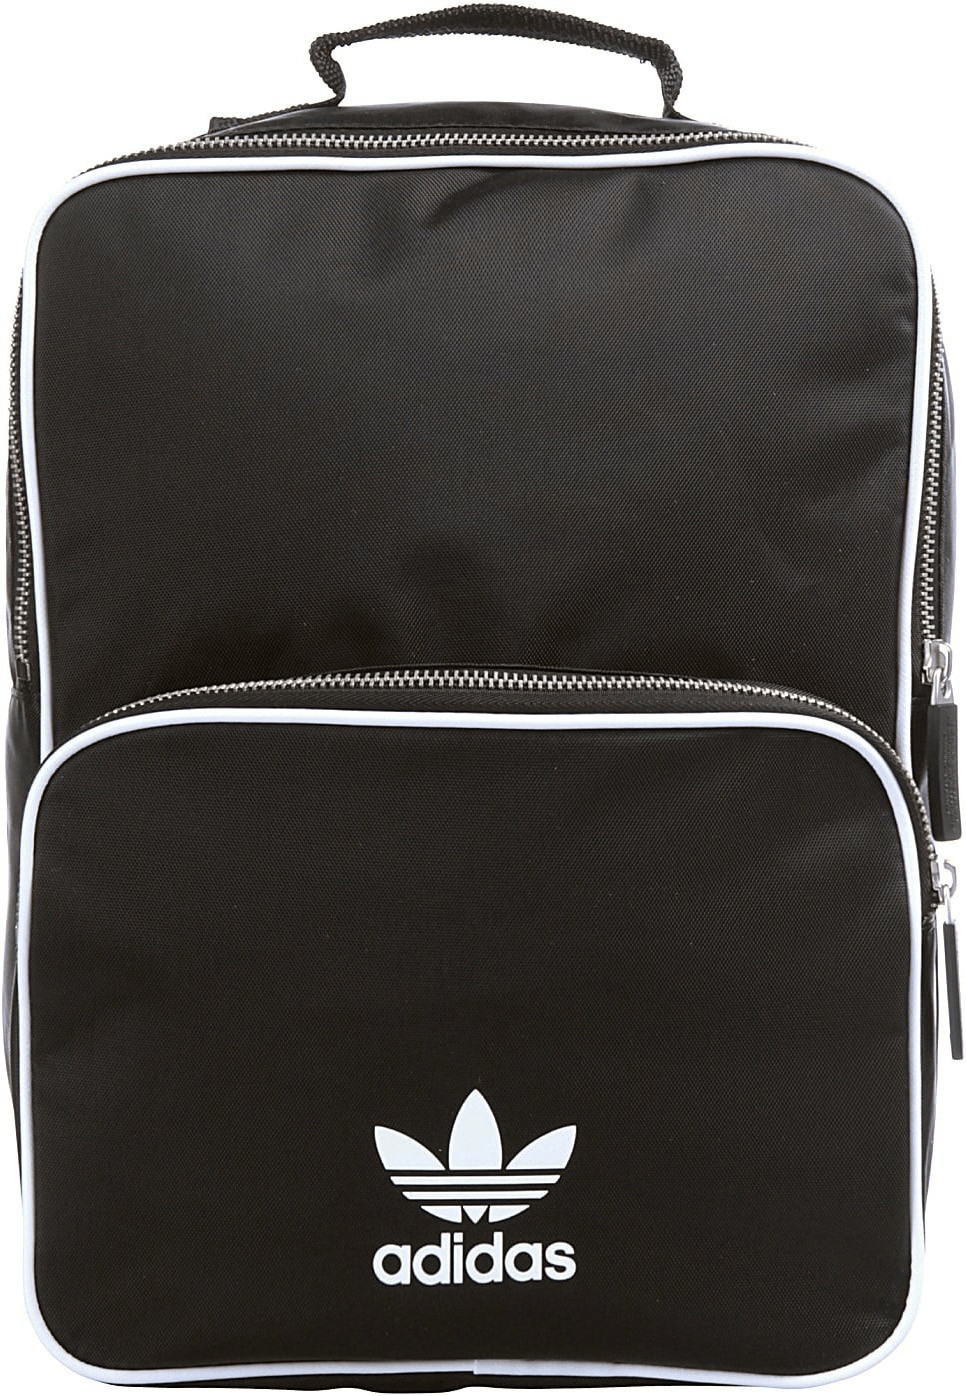 Adidas Classic Backpack M